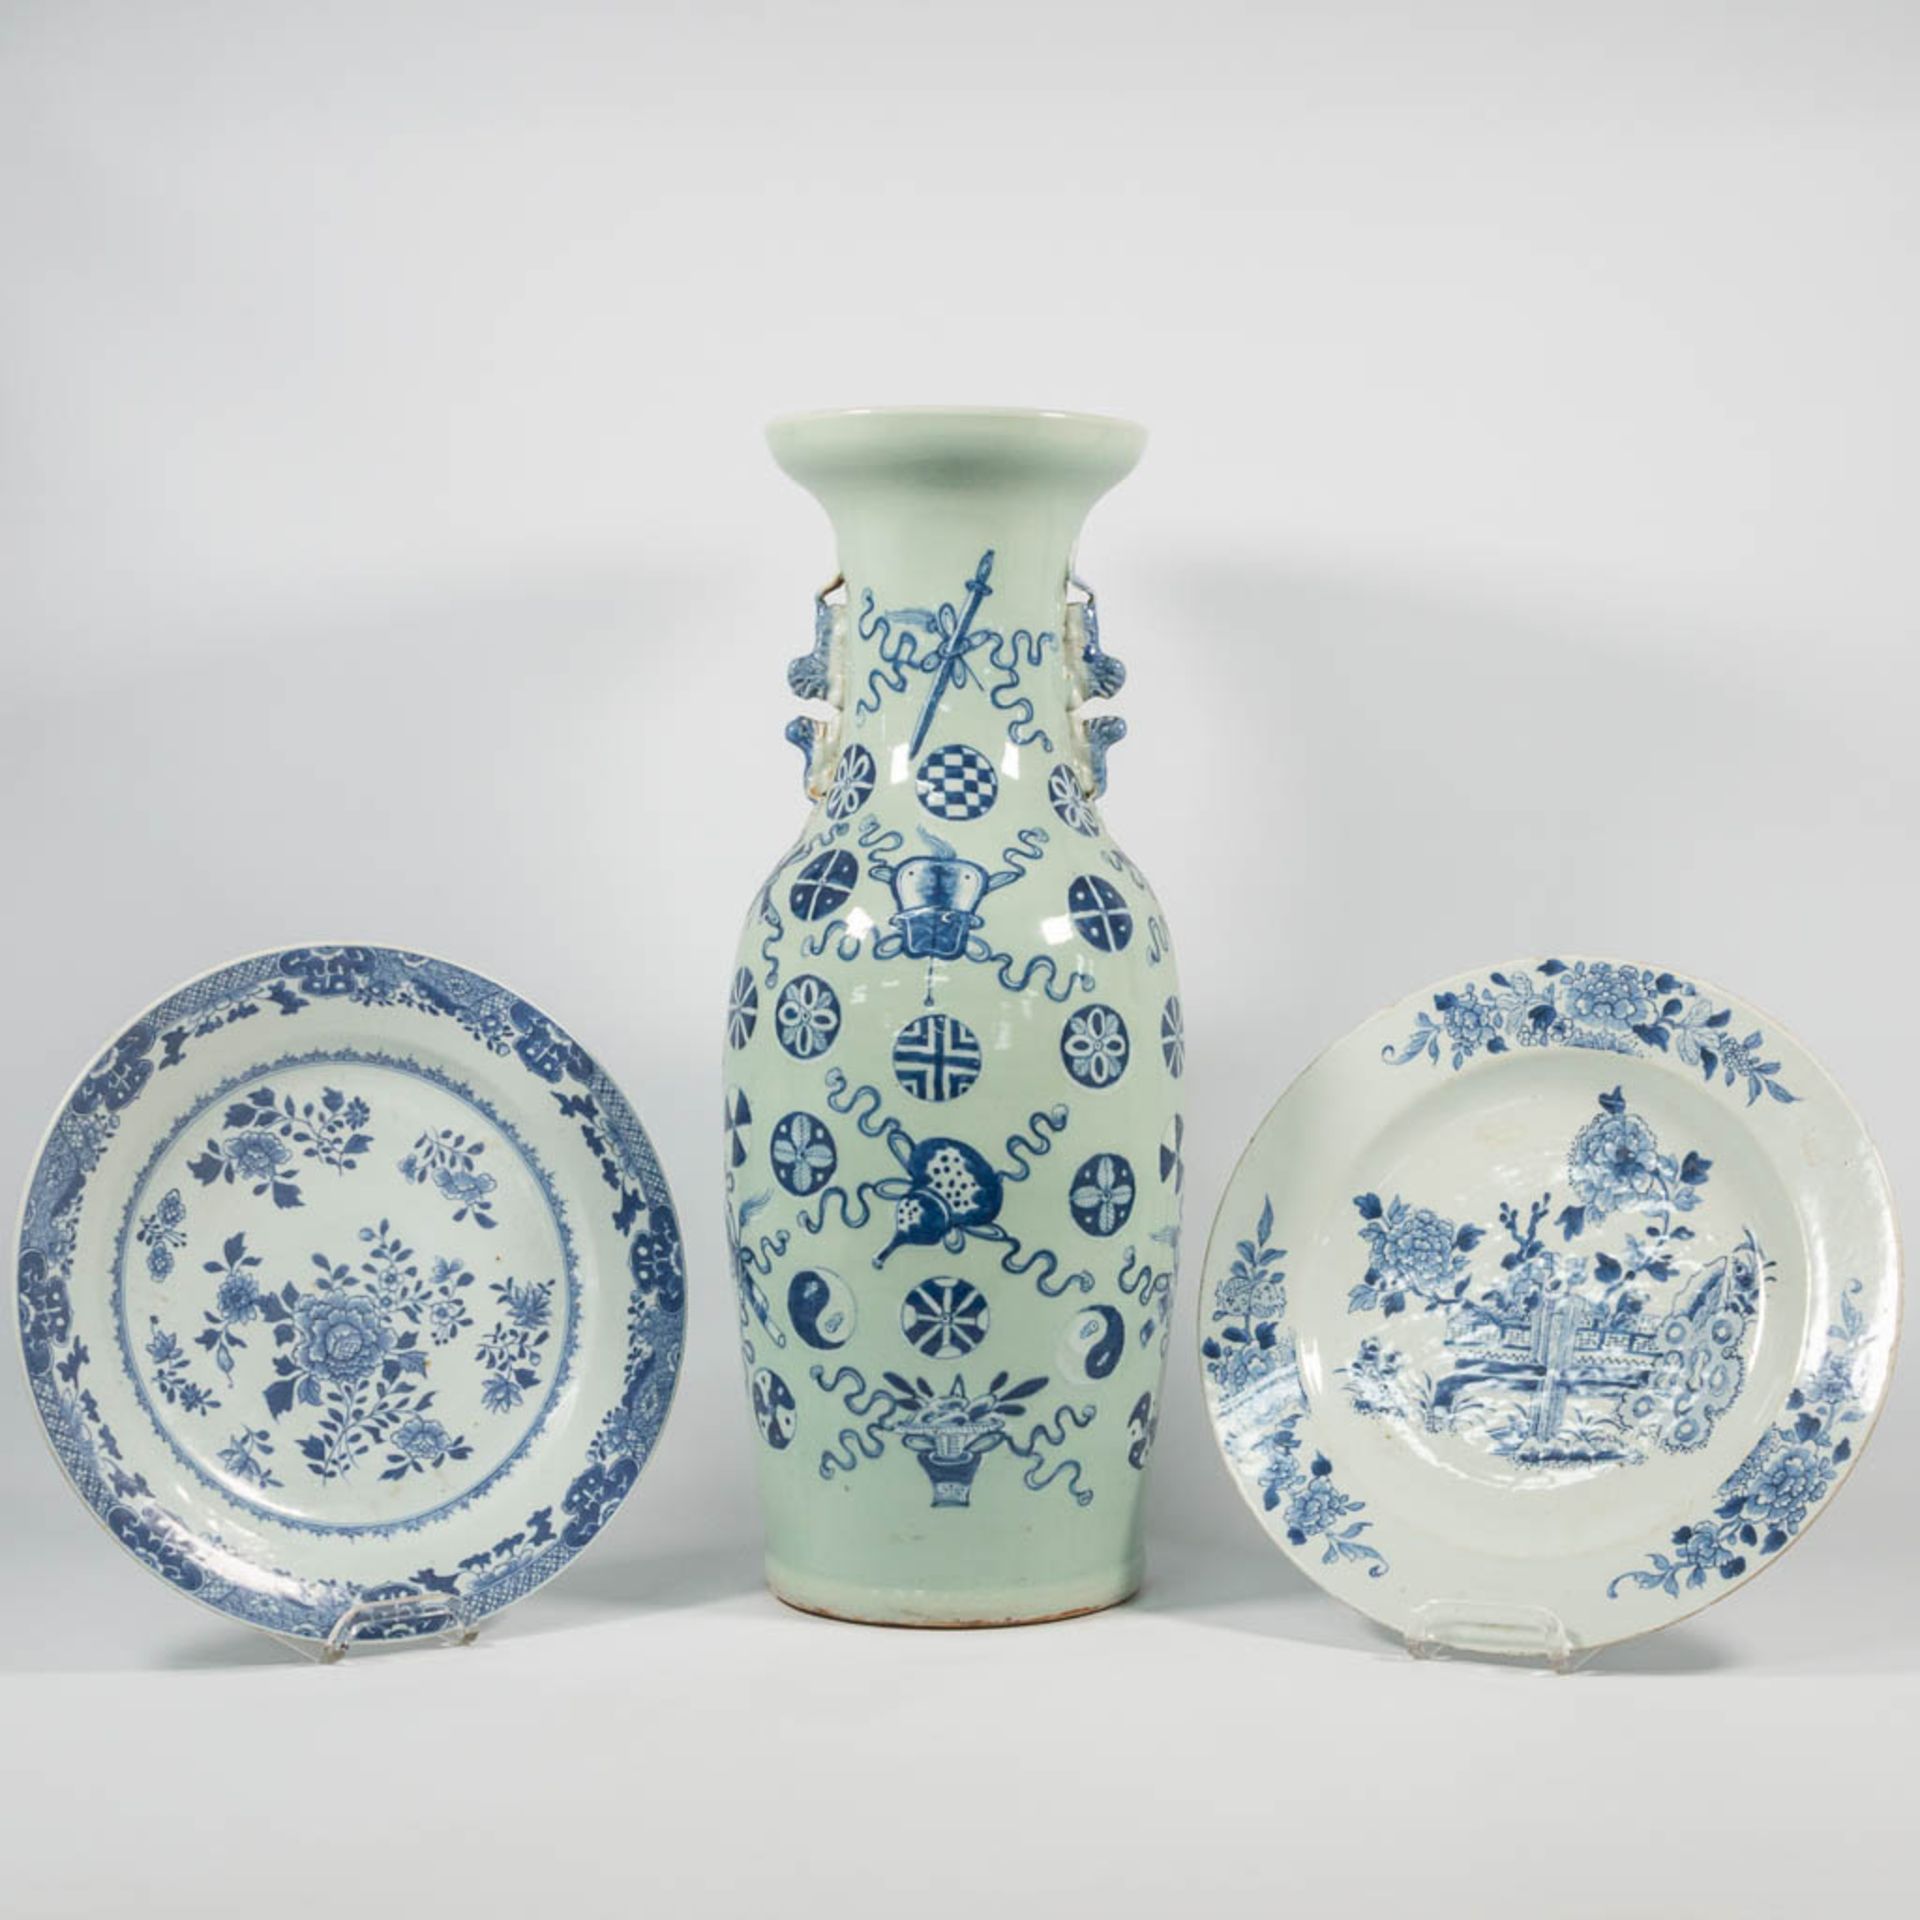 A blue and white Chinese Vase with symbolic decor, combined with 2 blue and white porcelain plates. - Image 16 of 33